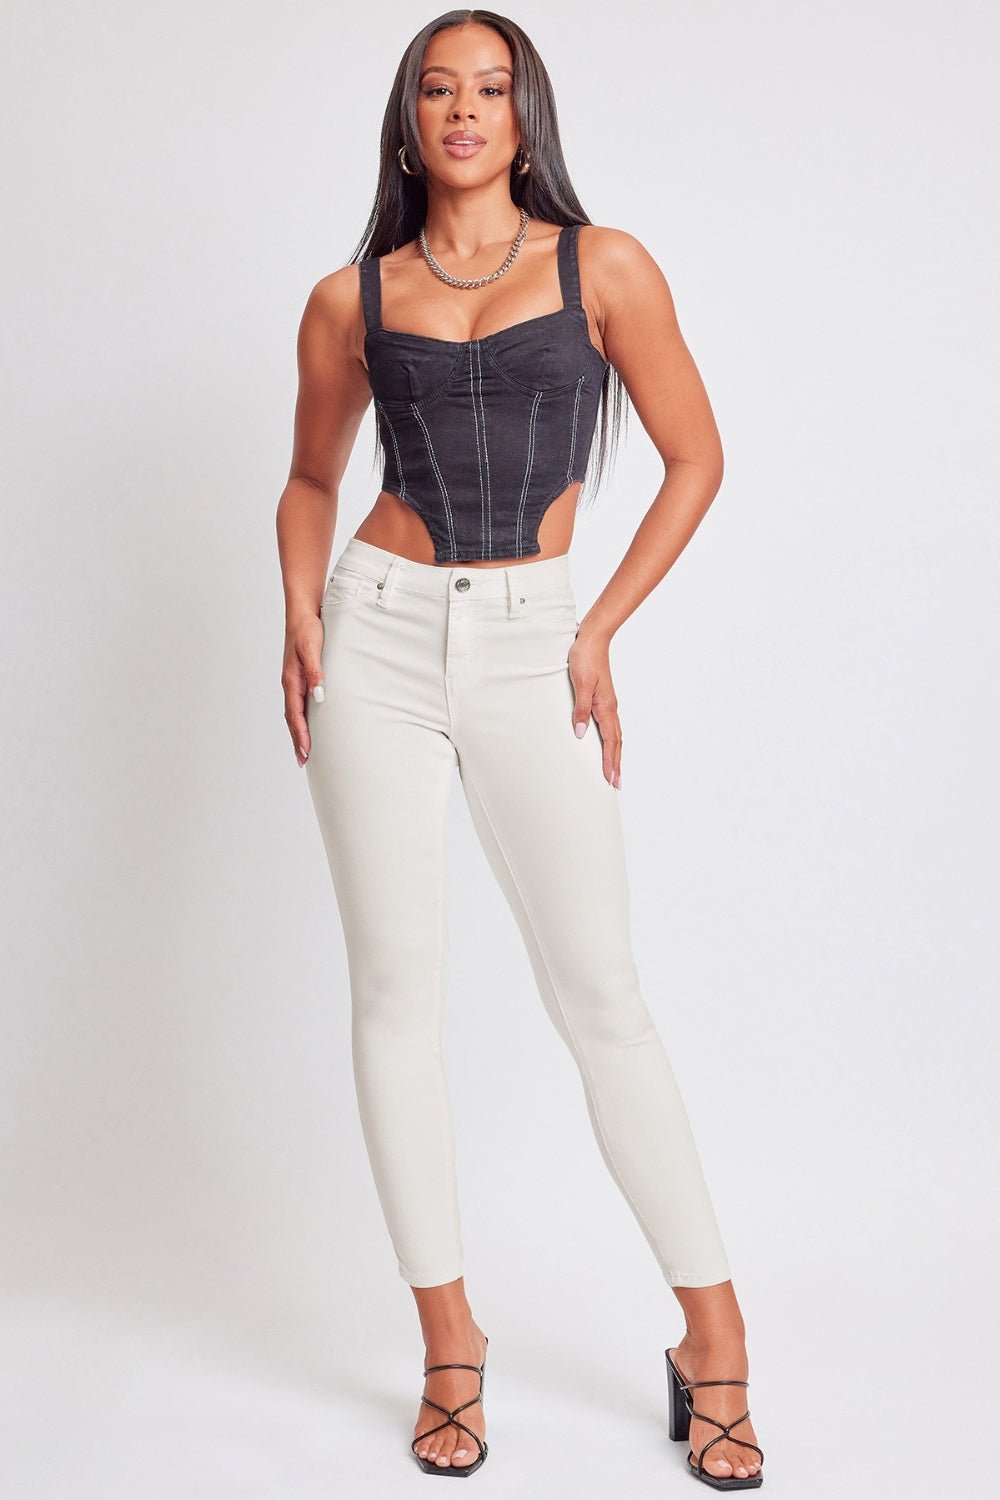 Hyperstretch Mid-Rise Skinny Jeans in Vanilla CreamJeansYMI Jeanswear